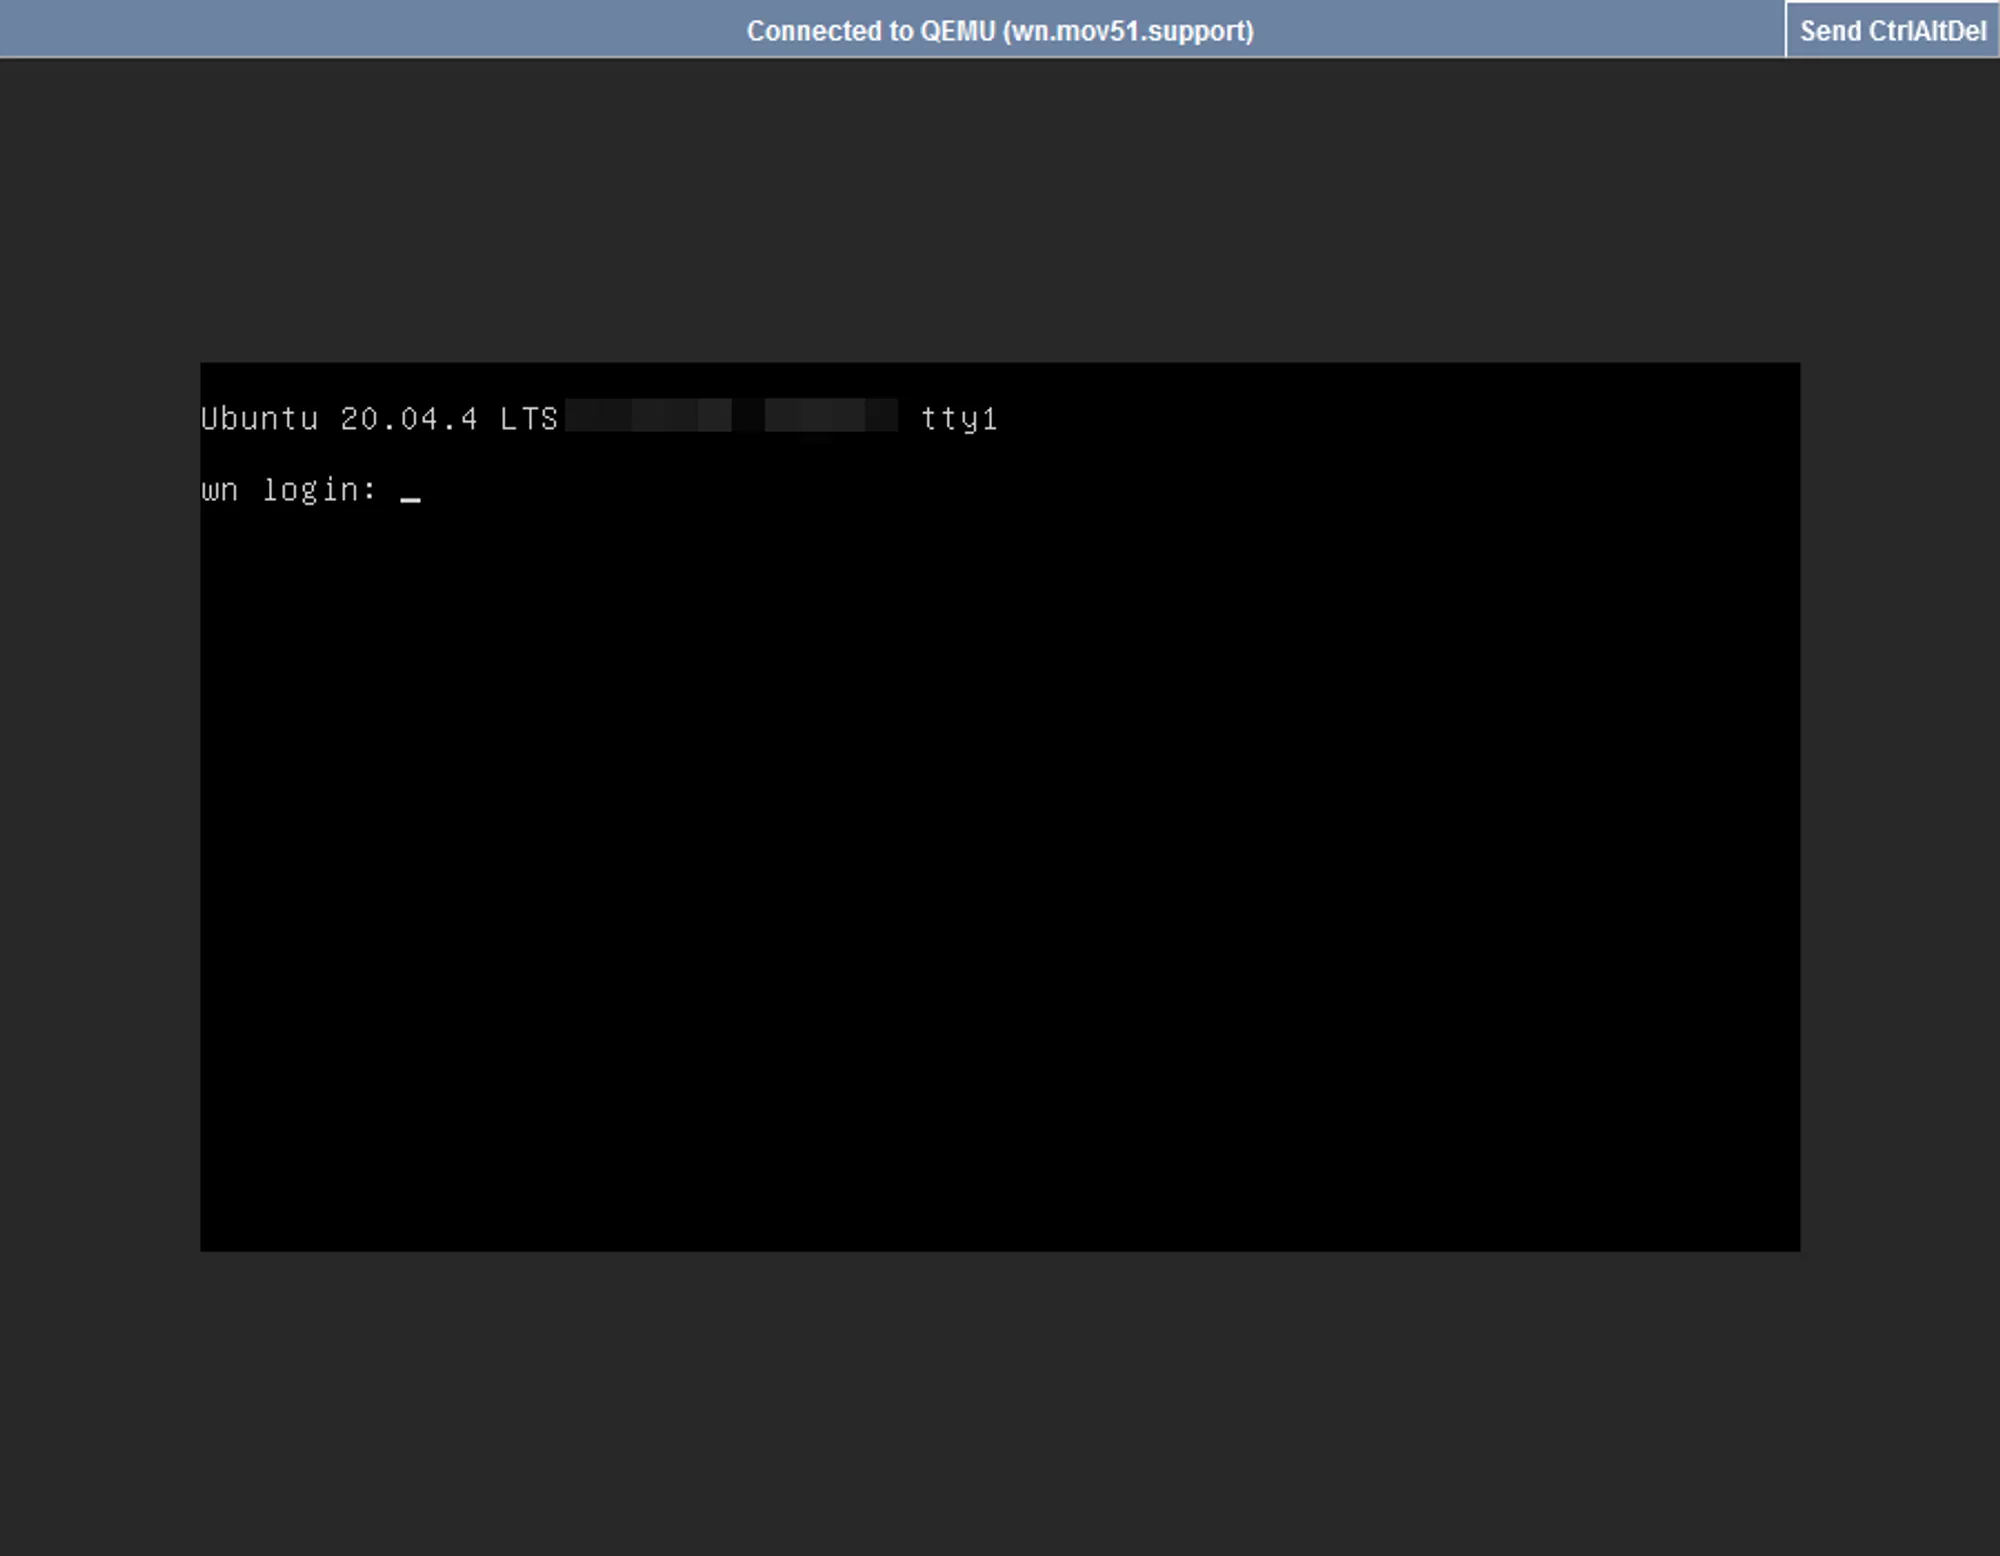 The noVNC page showing a Linux terminal